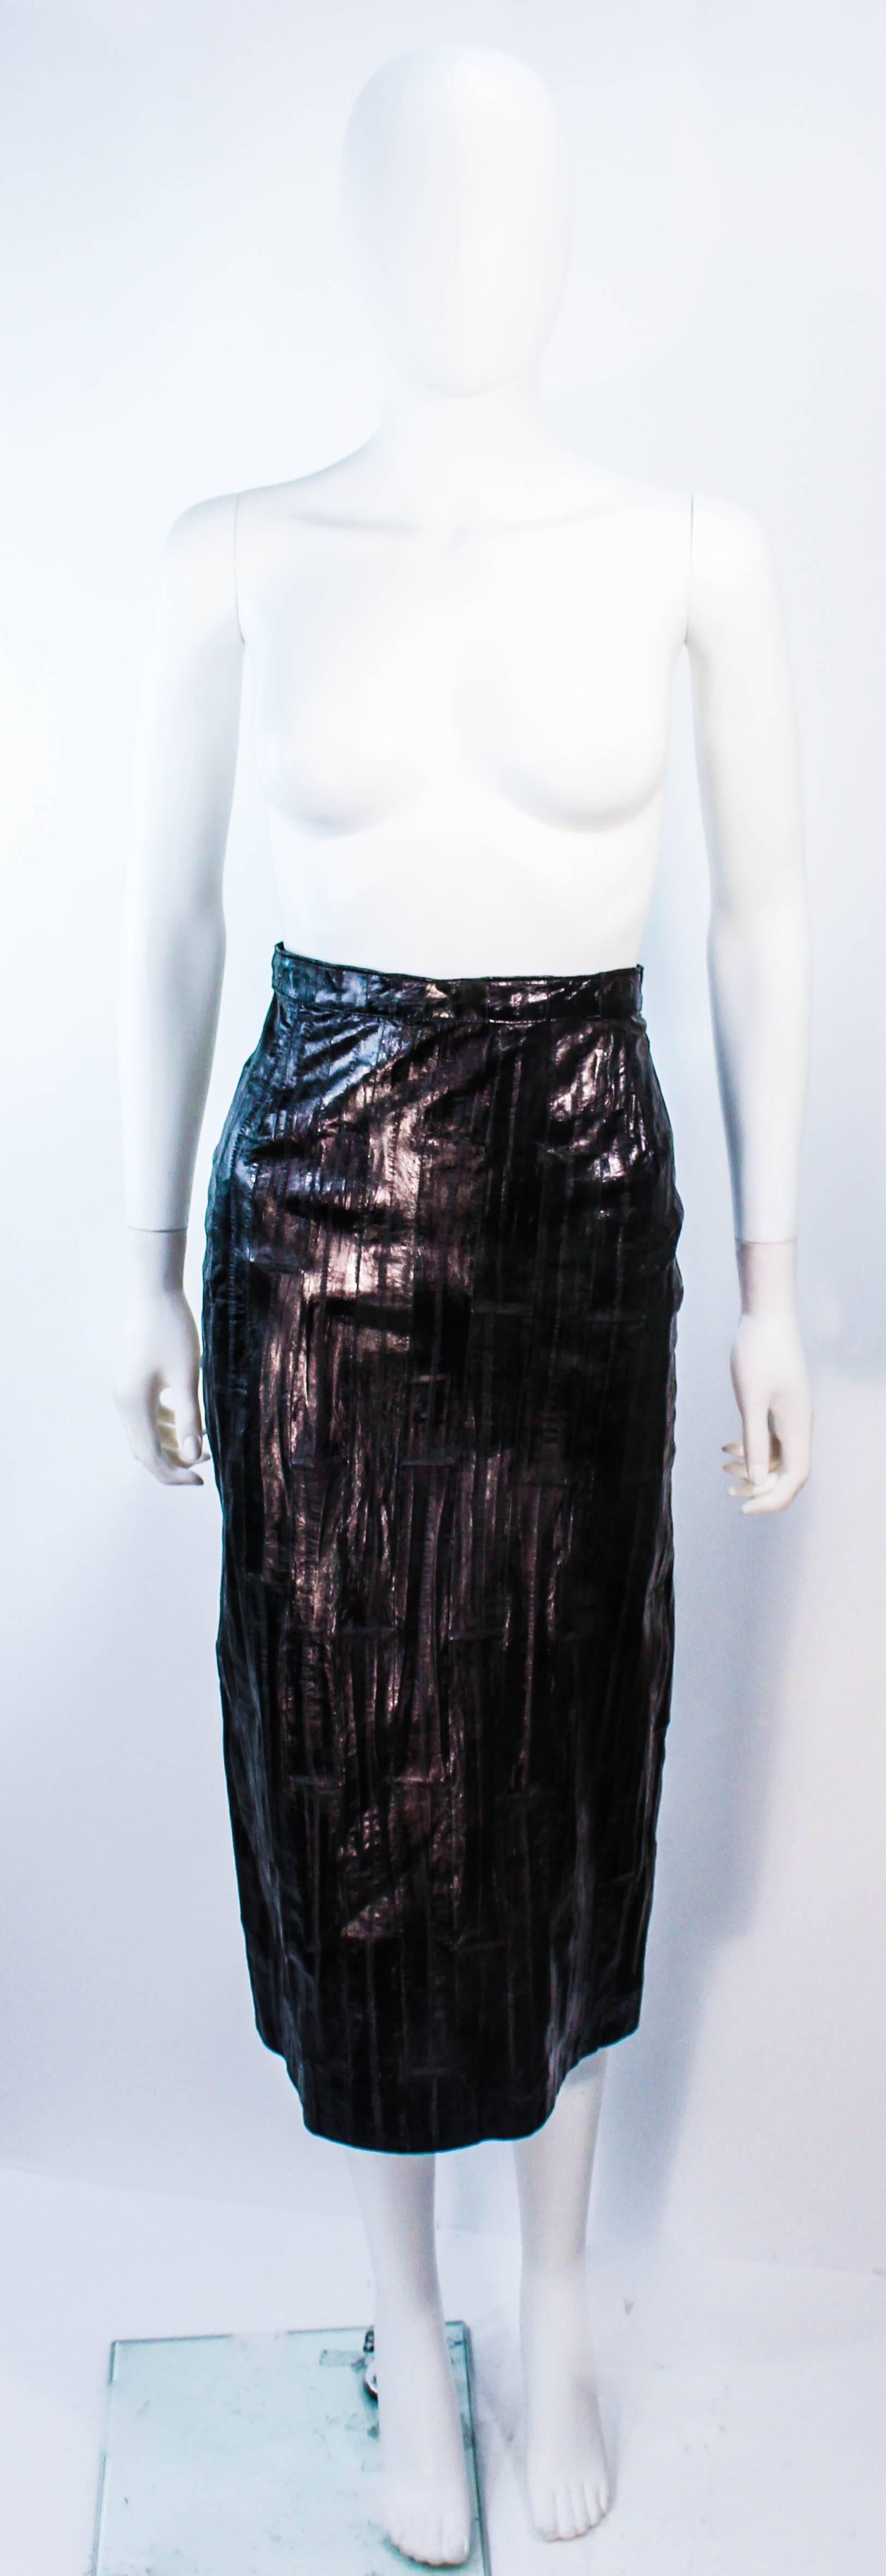 This Krizia design is composed of black eel with a shine finish. Features a midi length with zipper closure. In excellent vintage condition.

**Please cross-reference measurements for personal accuracy. Size in description box is an estimation.